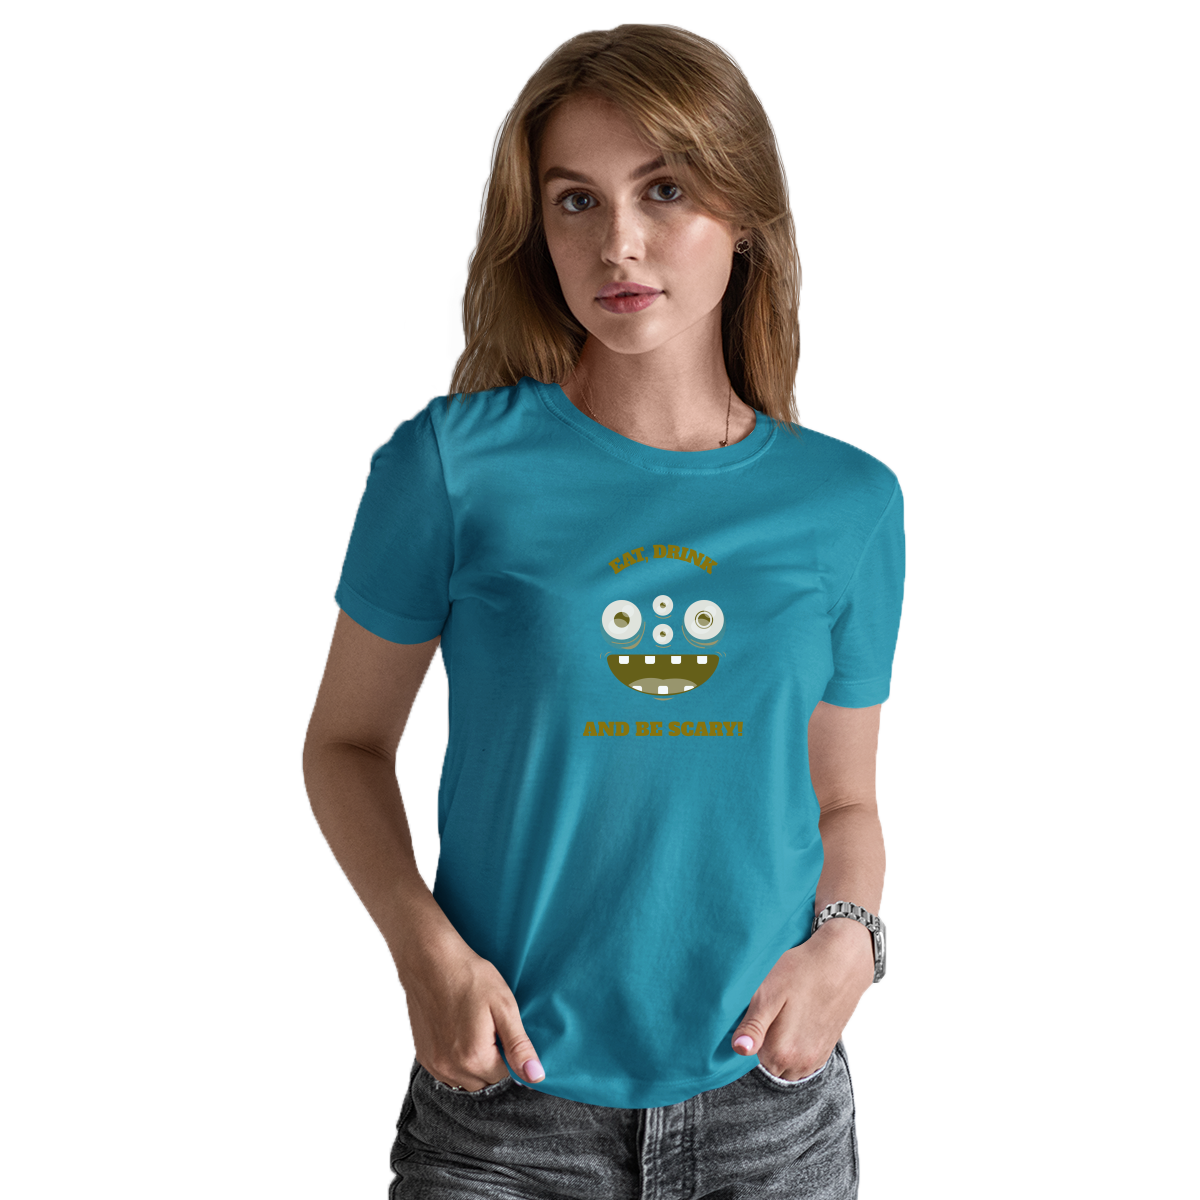 Eat, Drink and Be Scary! Women's T-shirt | Turquoise